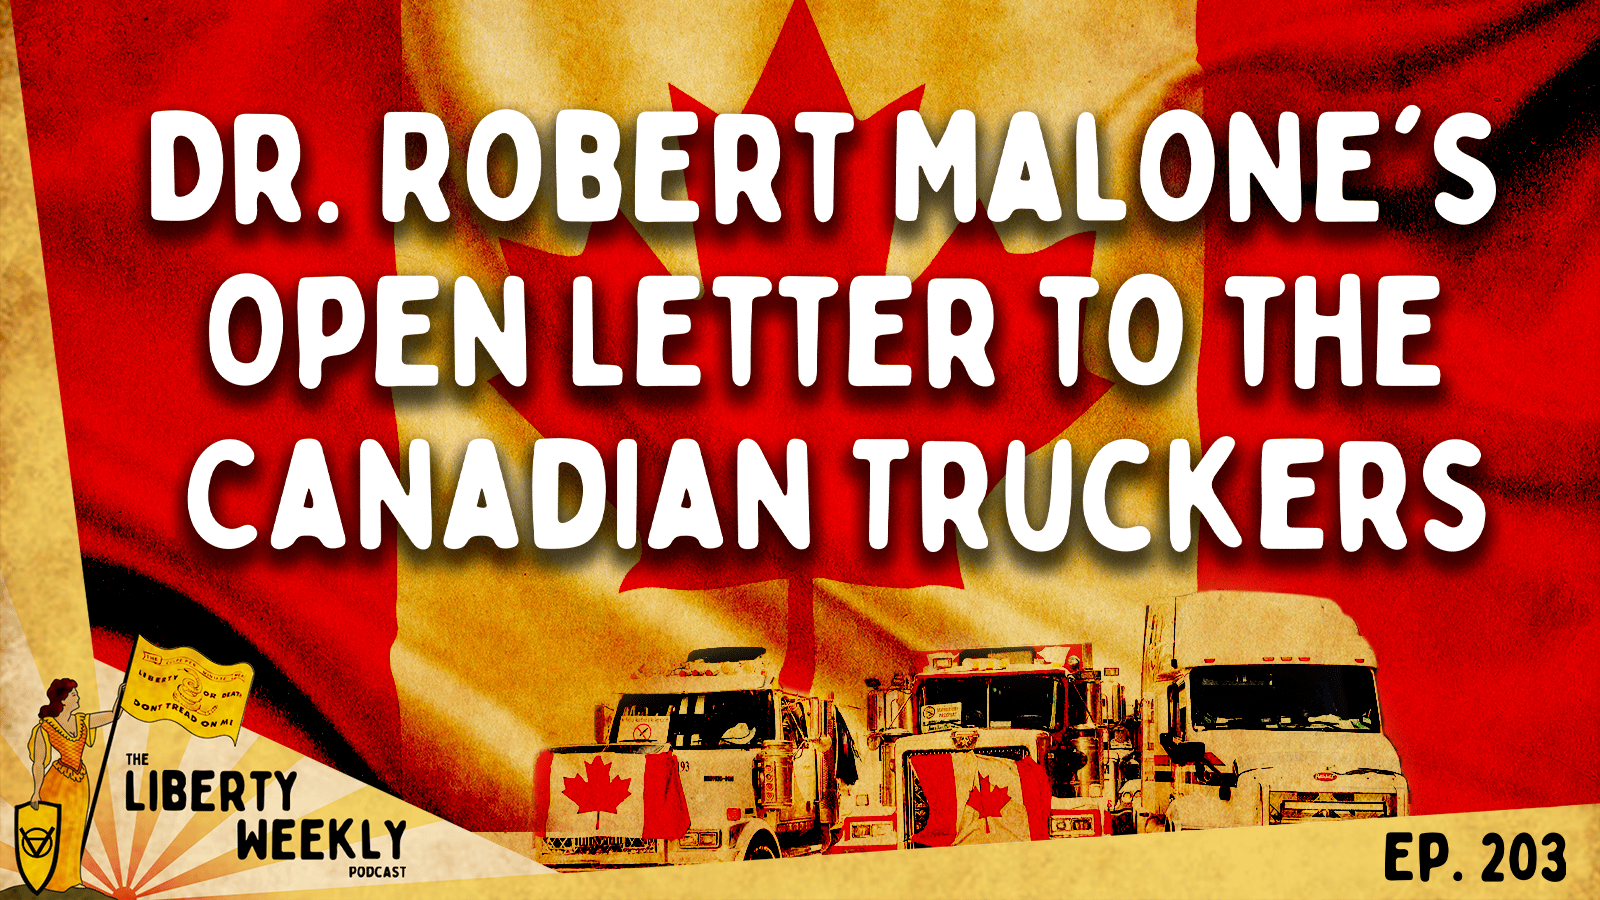 Dr. Robert Malone’s Open Letter to the Canadian Truckers Ep. 203